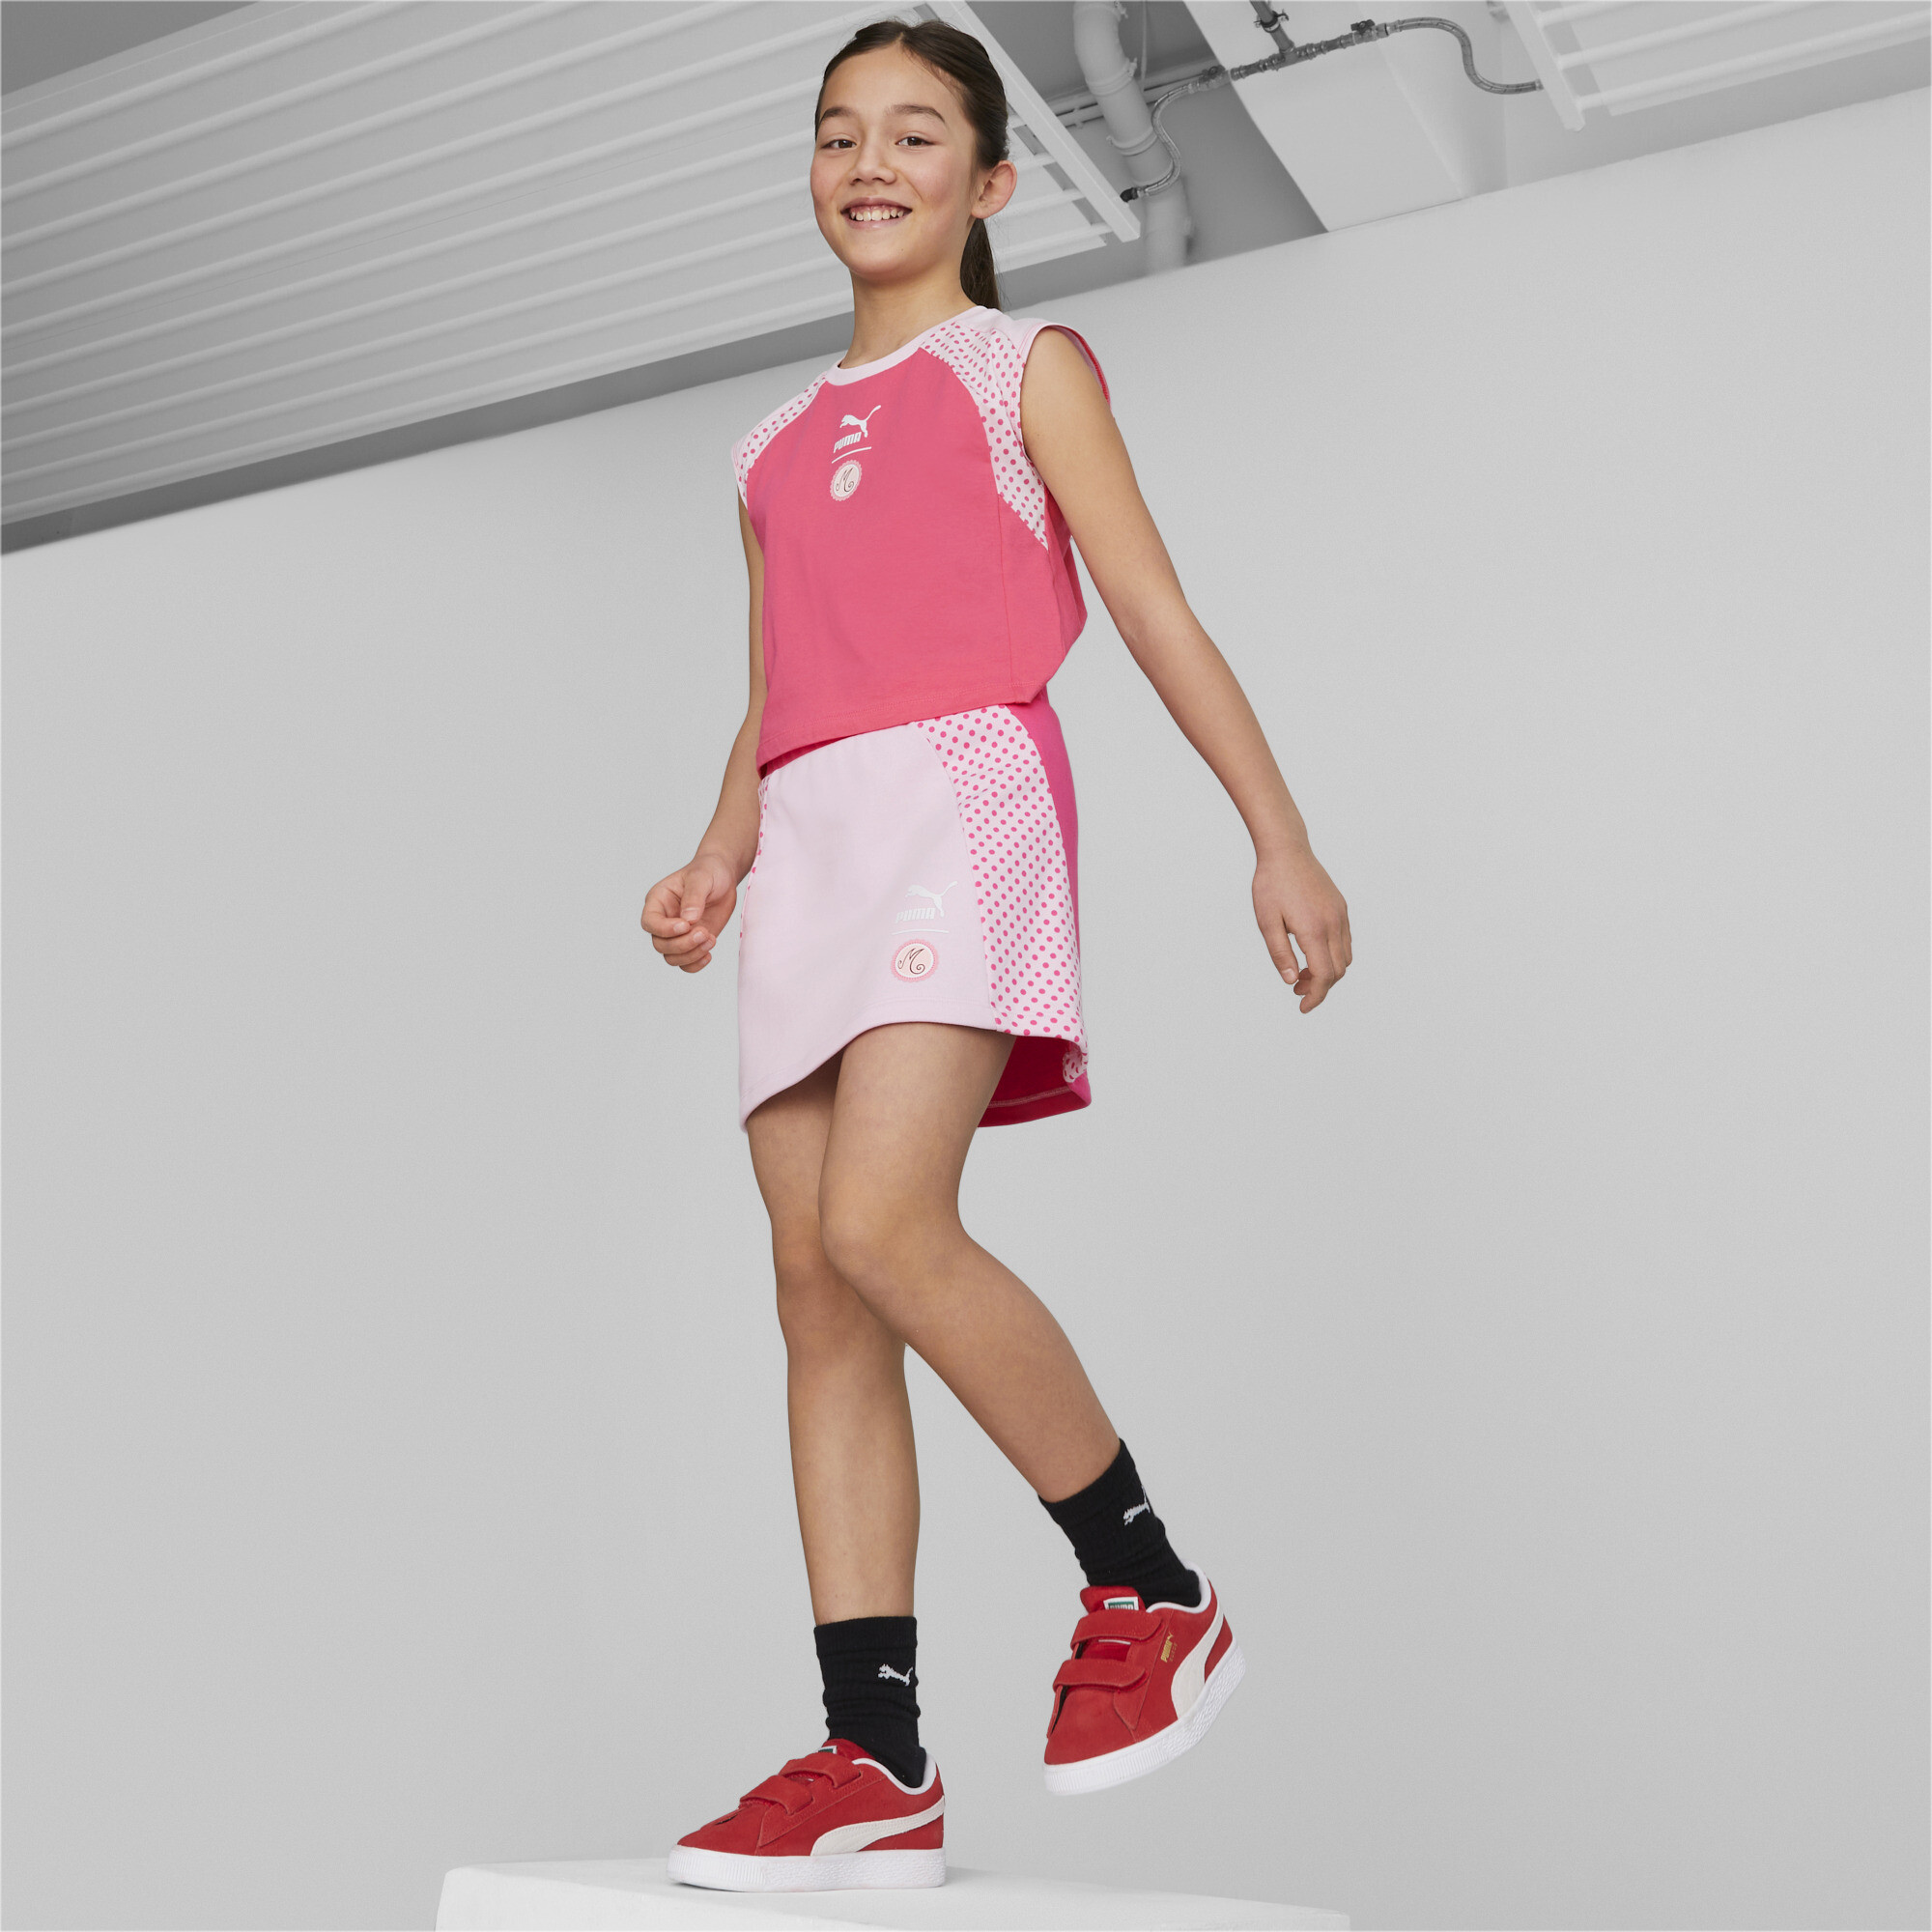 PUMA X MIRACULOUS Skirt In Pink, Size 13-14 Youth